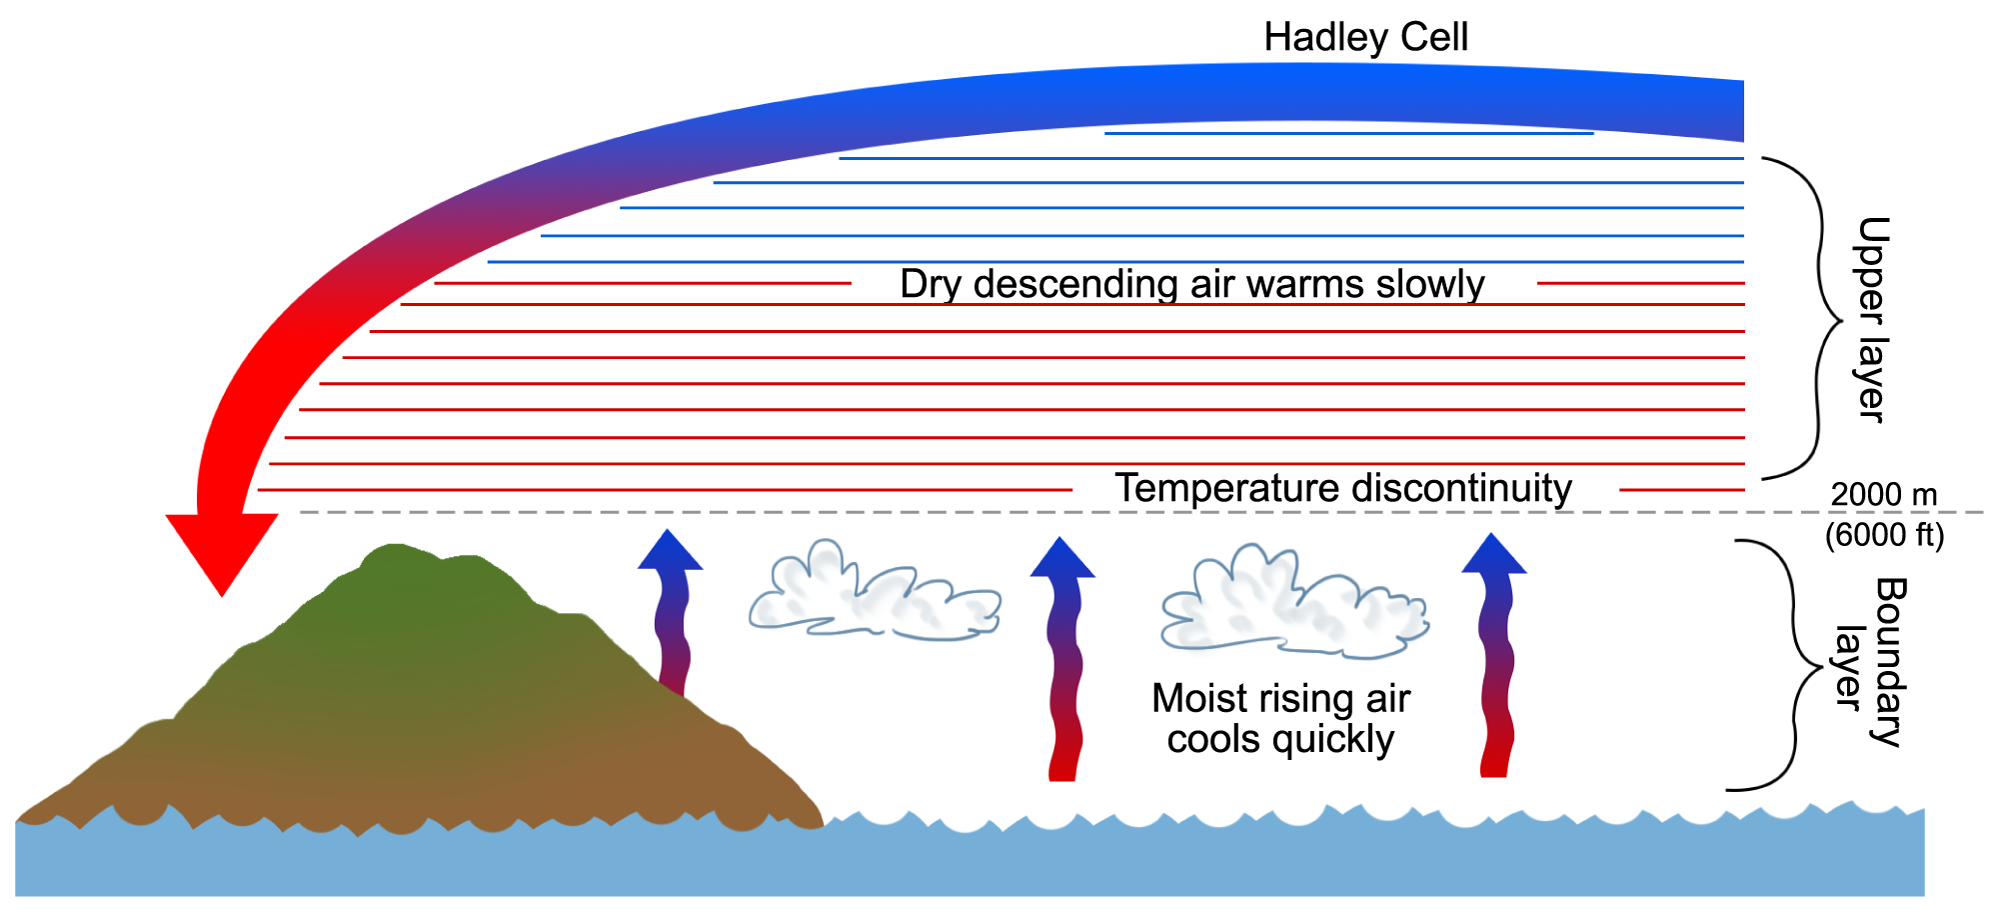 Diagram illustrating the trade wind inversion. An upper layer of air occurs at a higher altitudes than a boundary layer that sits at the surface. Between the upper layer and the boundary layer is a temperature discontinuity at about 2000 meters or 6000 feet. The discontinuity occurs between the boundary layer (surface) air, which cools rapidly at higher altitudes, and the upper layer (Hadley cell) air, which warms as in sinks.